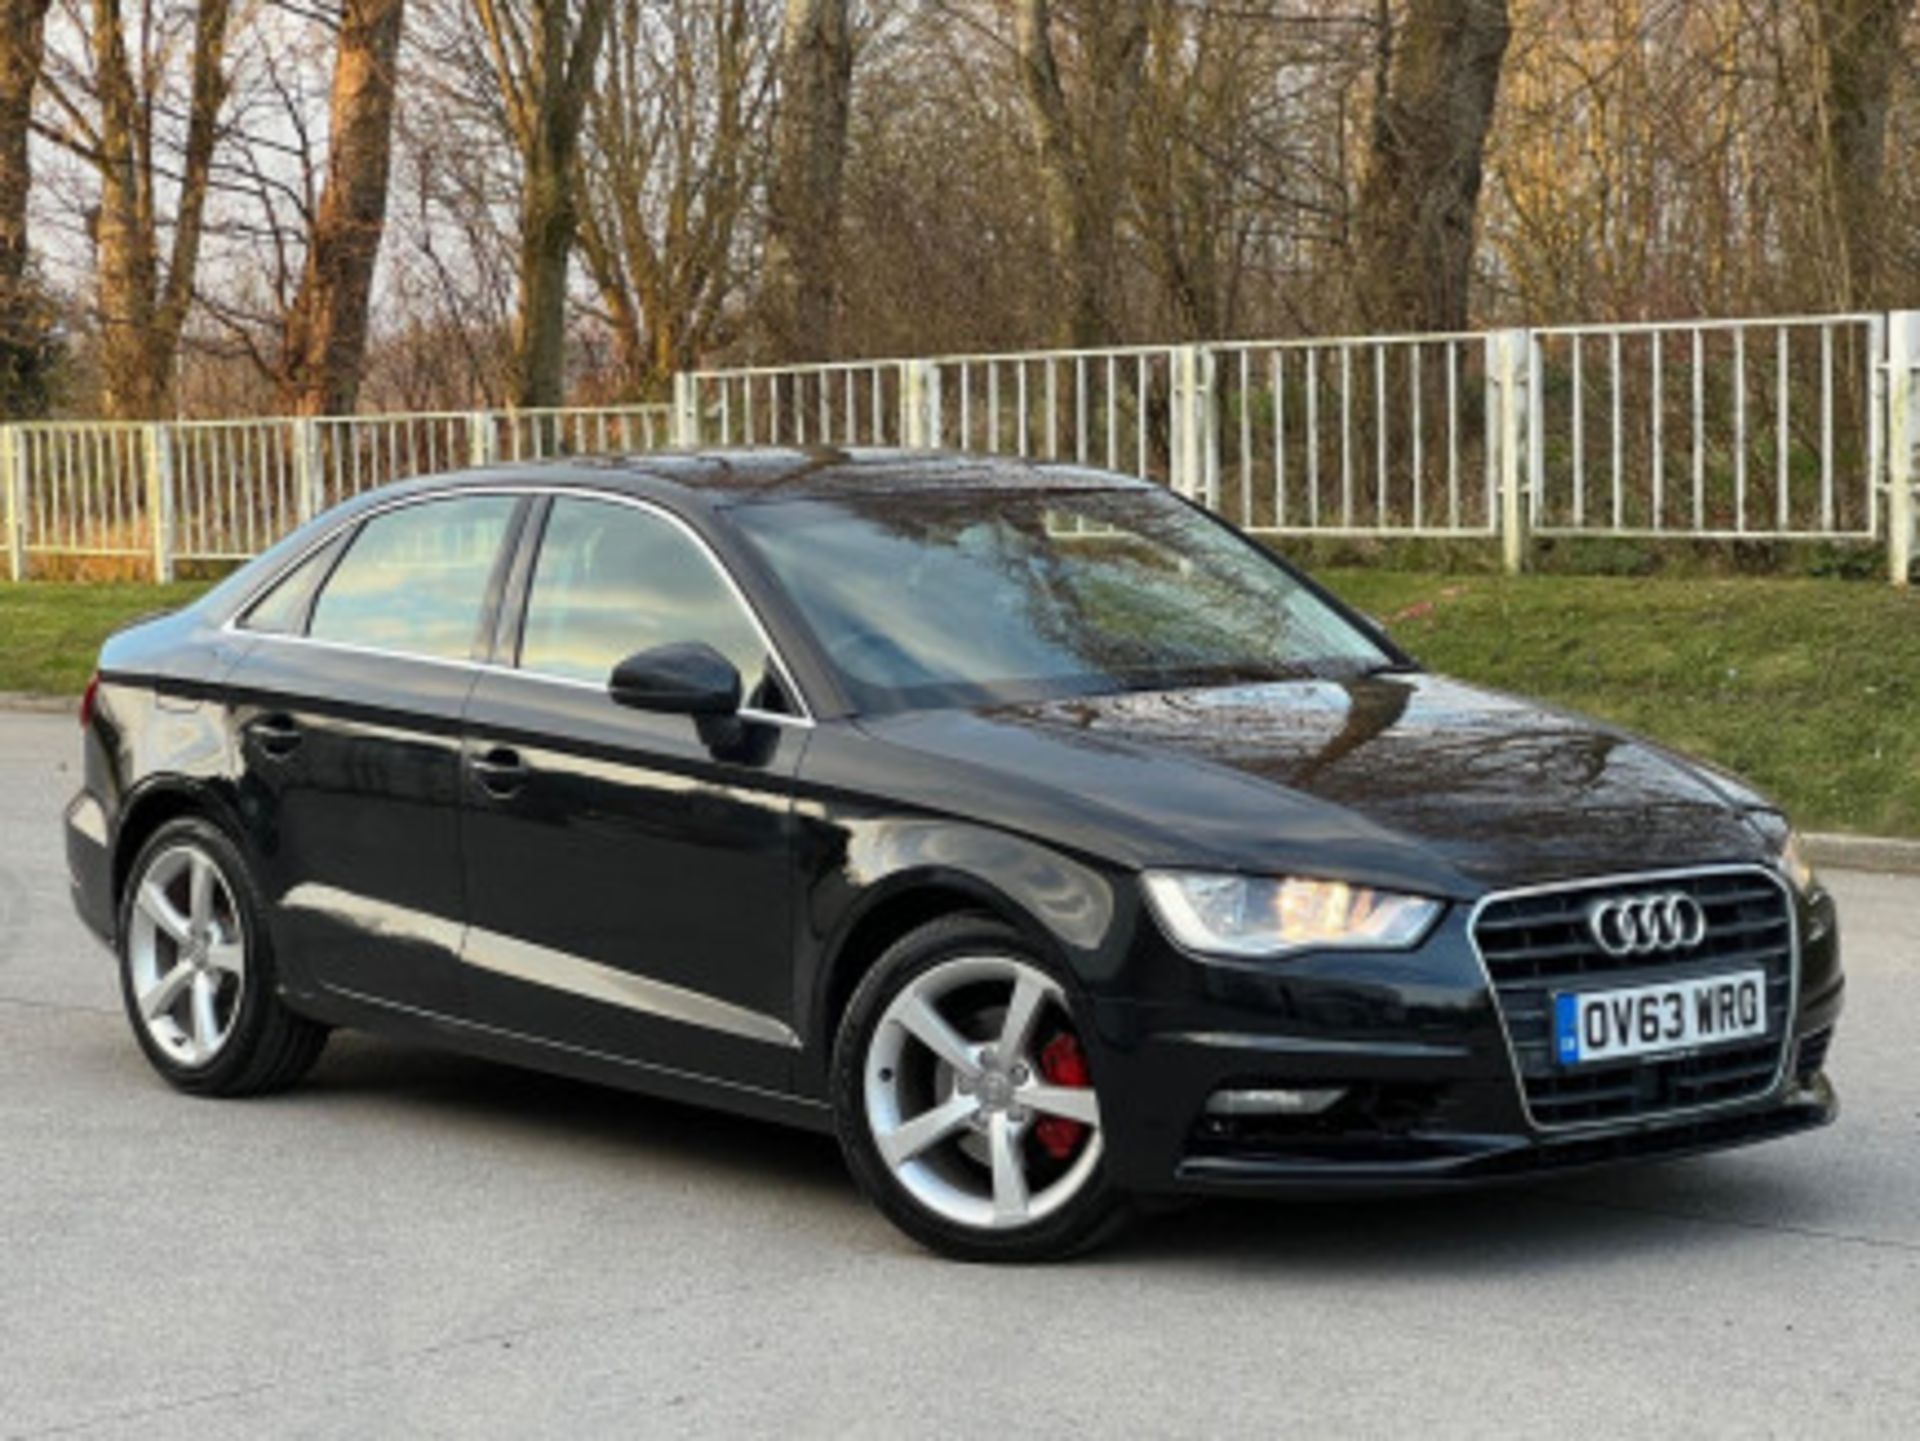 AUDI A3 2.0TDI SPORTBACK - STYLE, PERFORMANCE, AND COMFORT COMBINED >>--NO VAT ON HAMMER--<< - Image 79 of 216